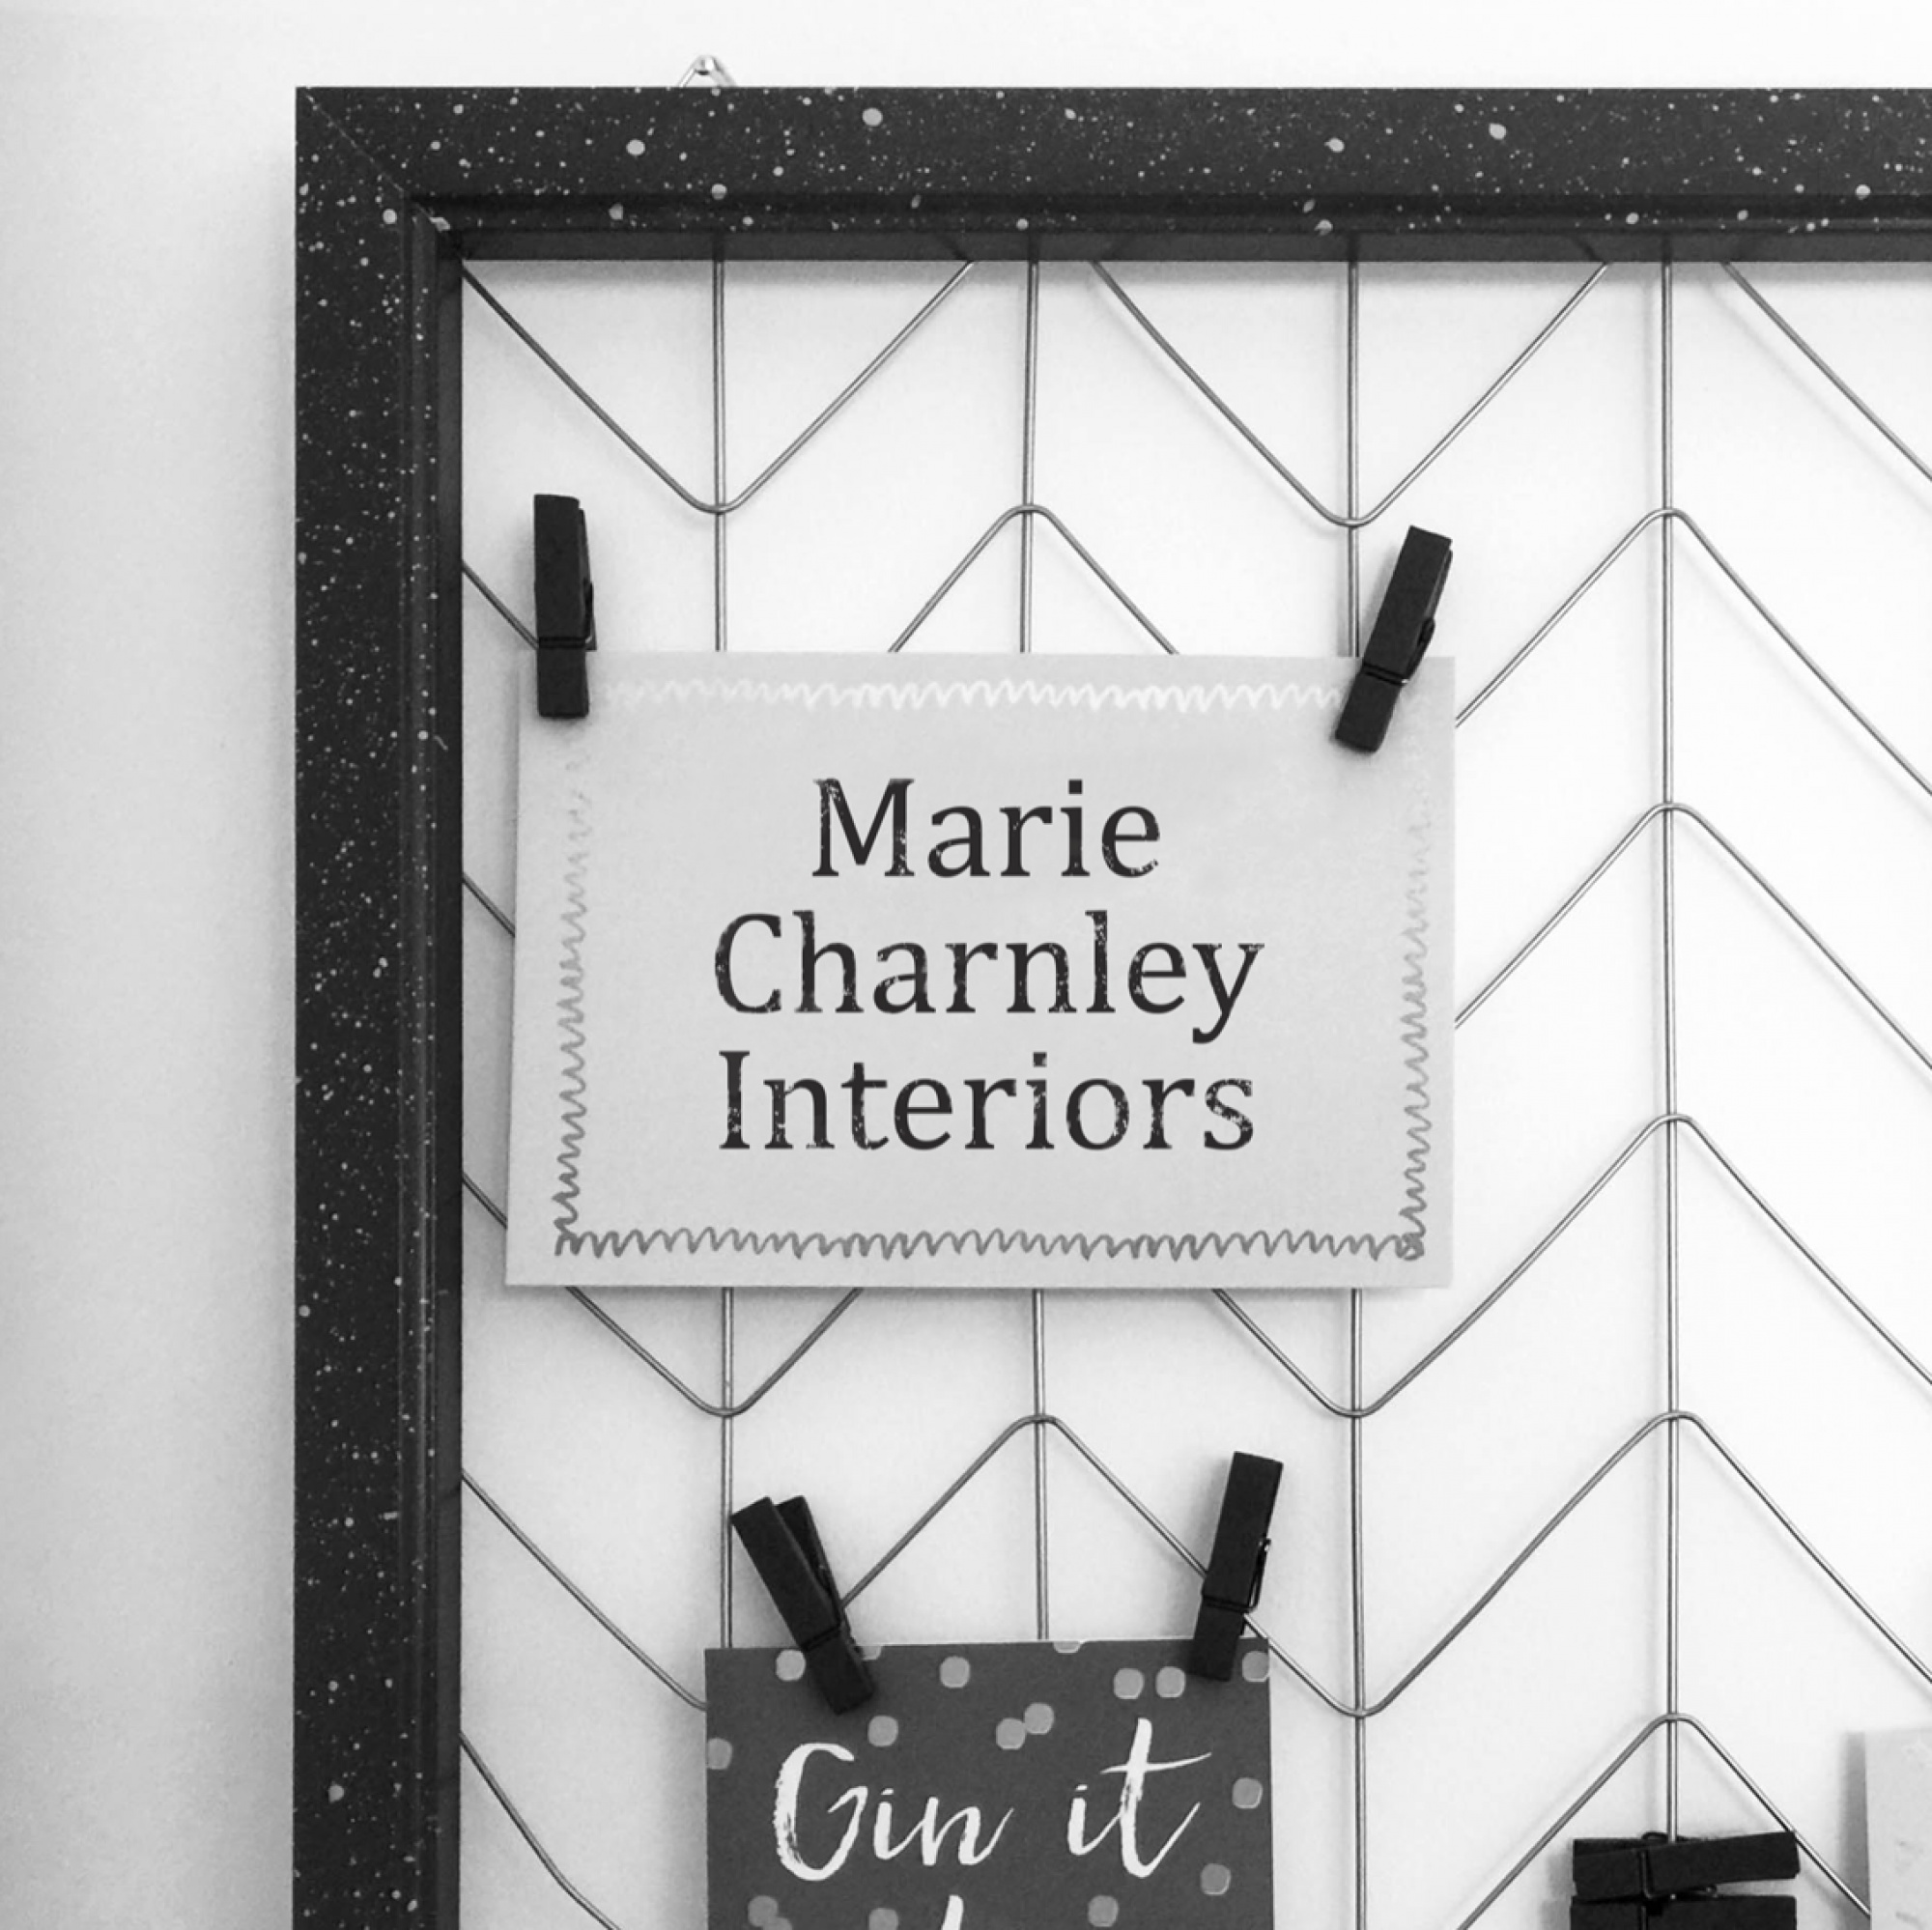 Marie Charnley Interiors